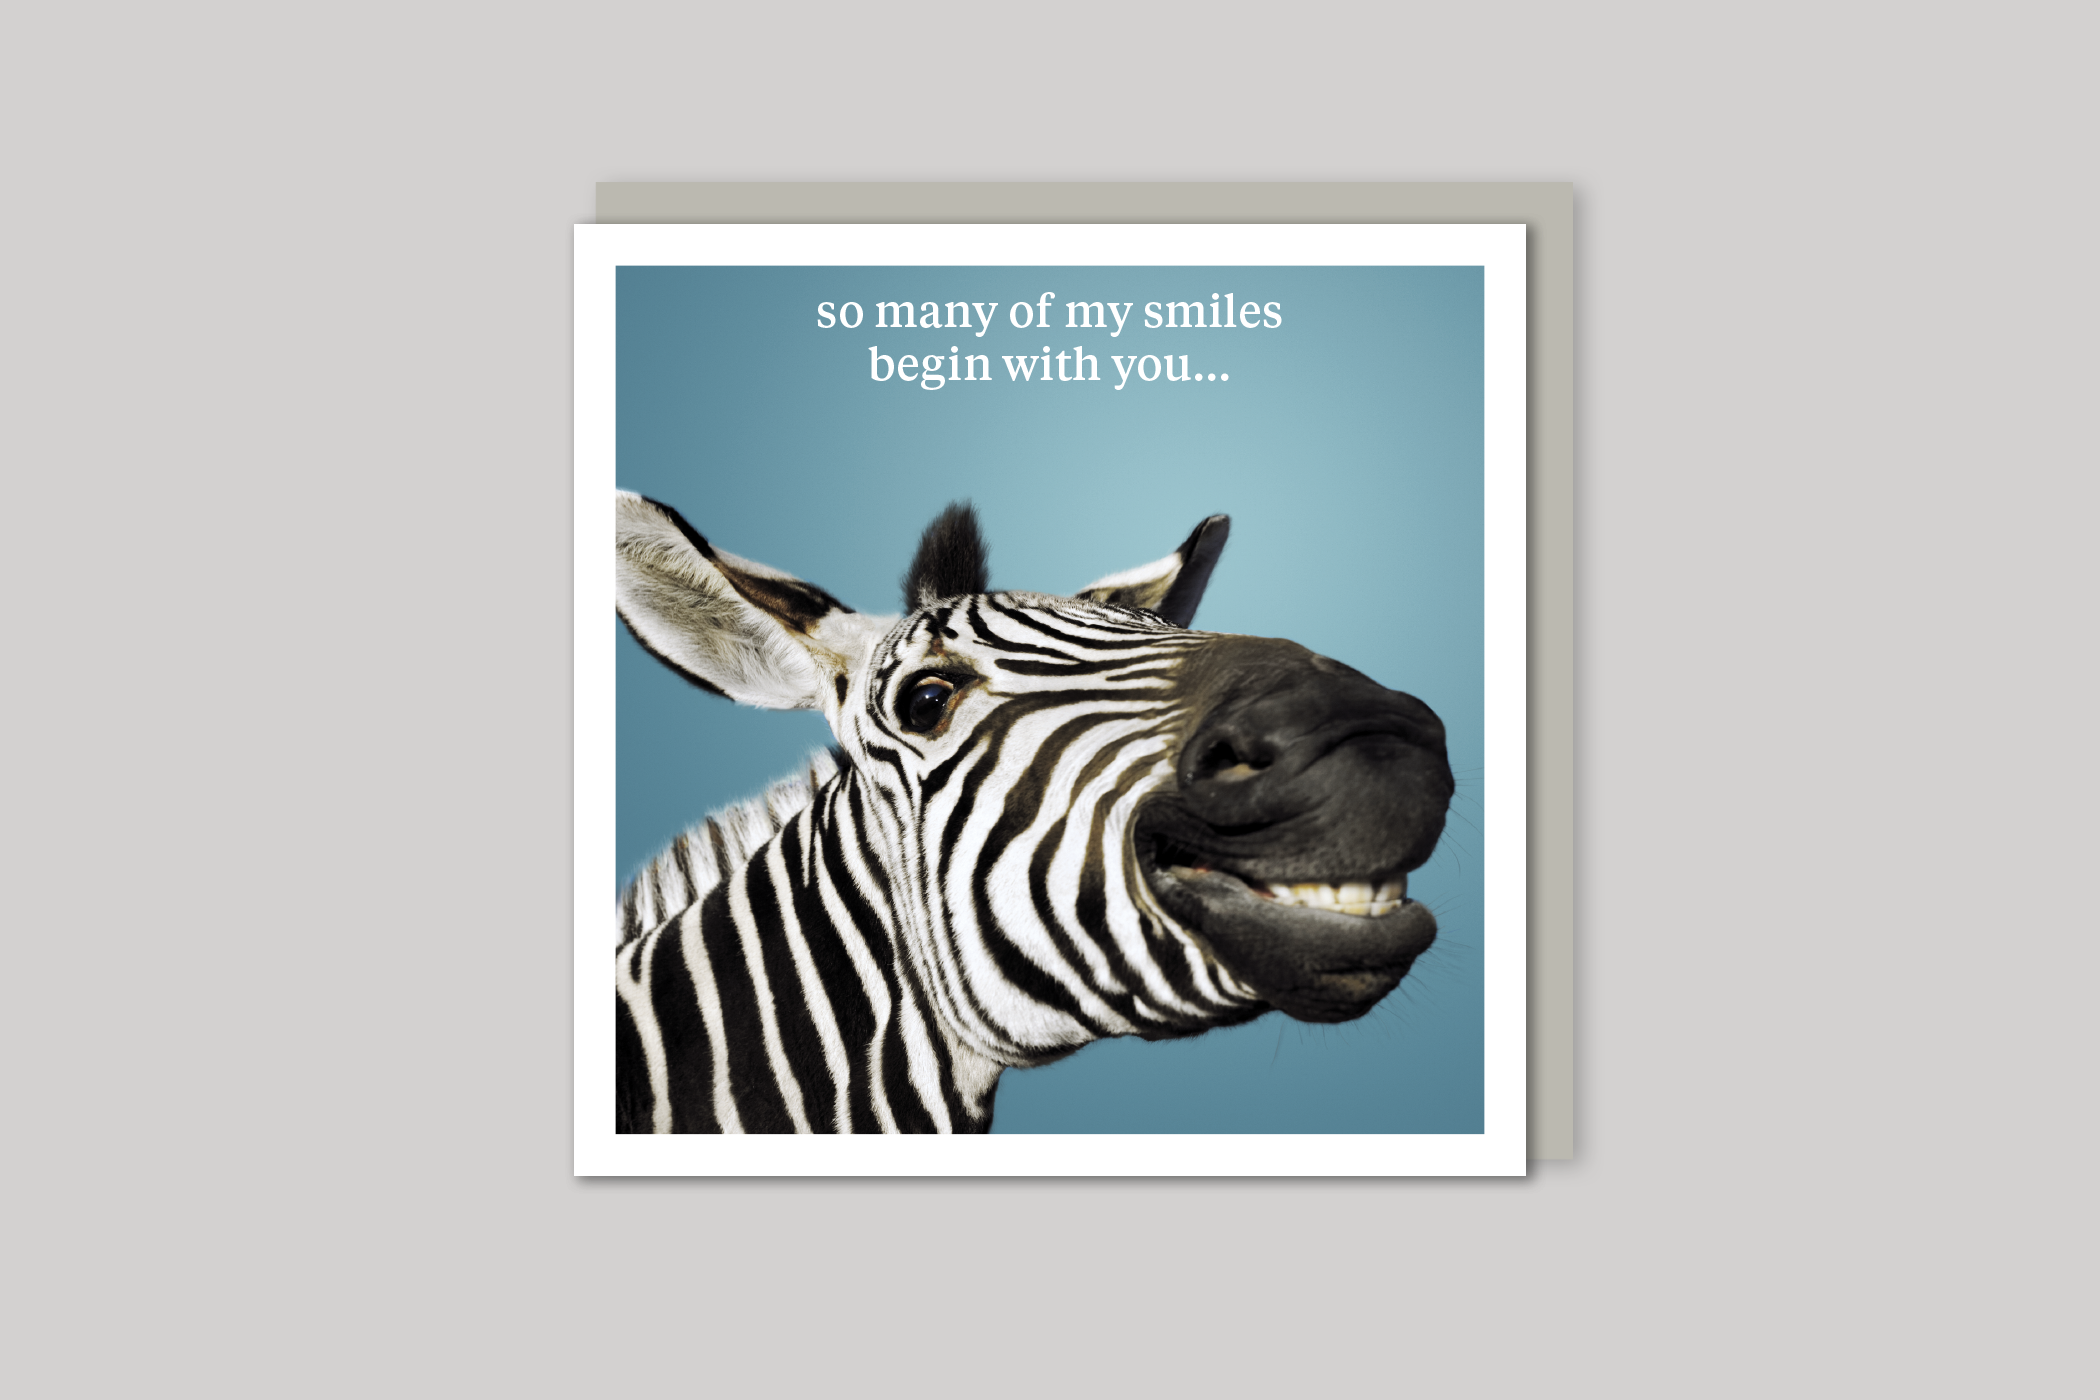 My Smiles quirky animal portrait from Curious World range of greeting cards by Icon, back page.